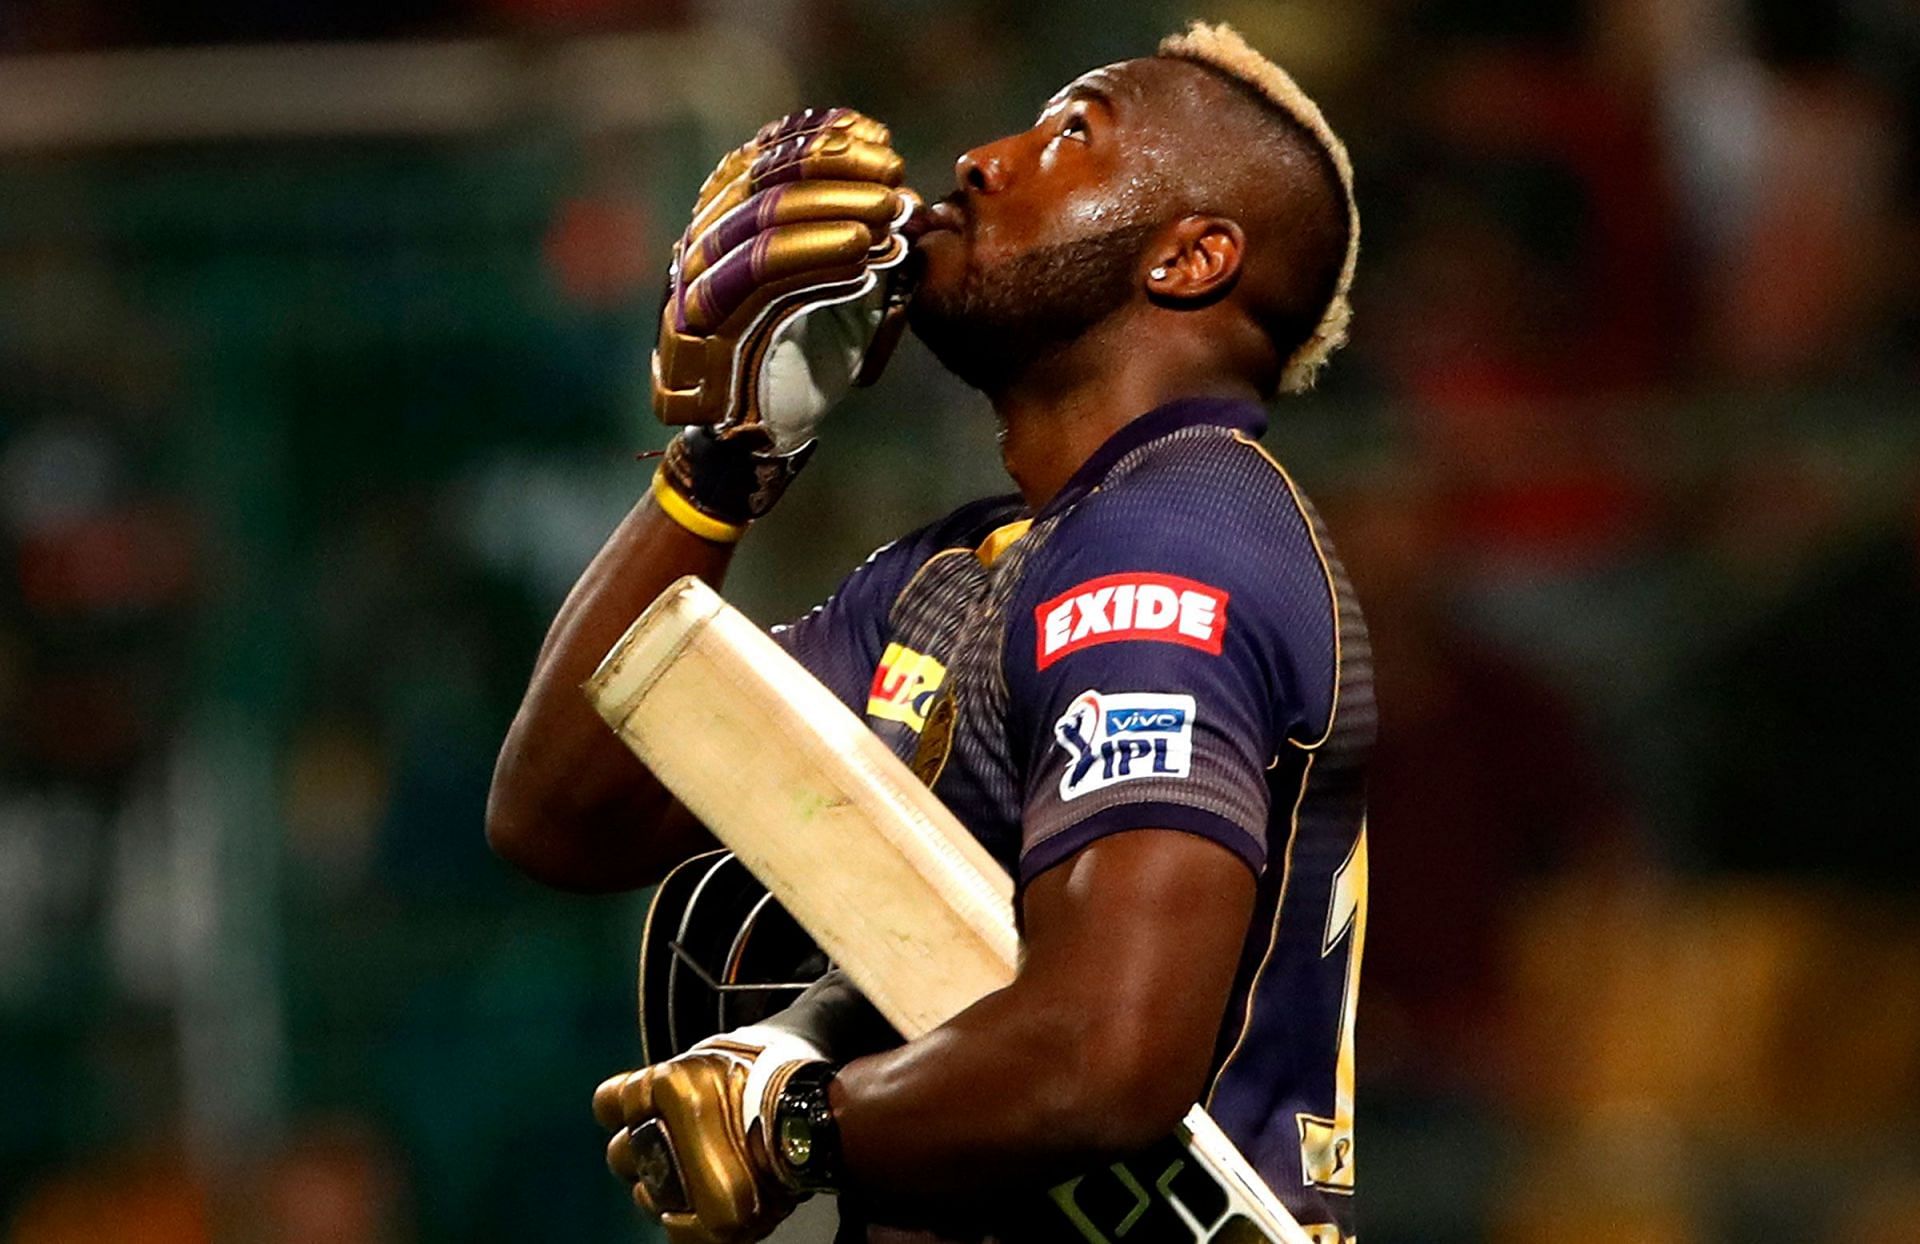 Andre Russell was in blistering hot form during 2019